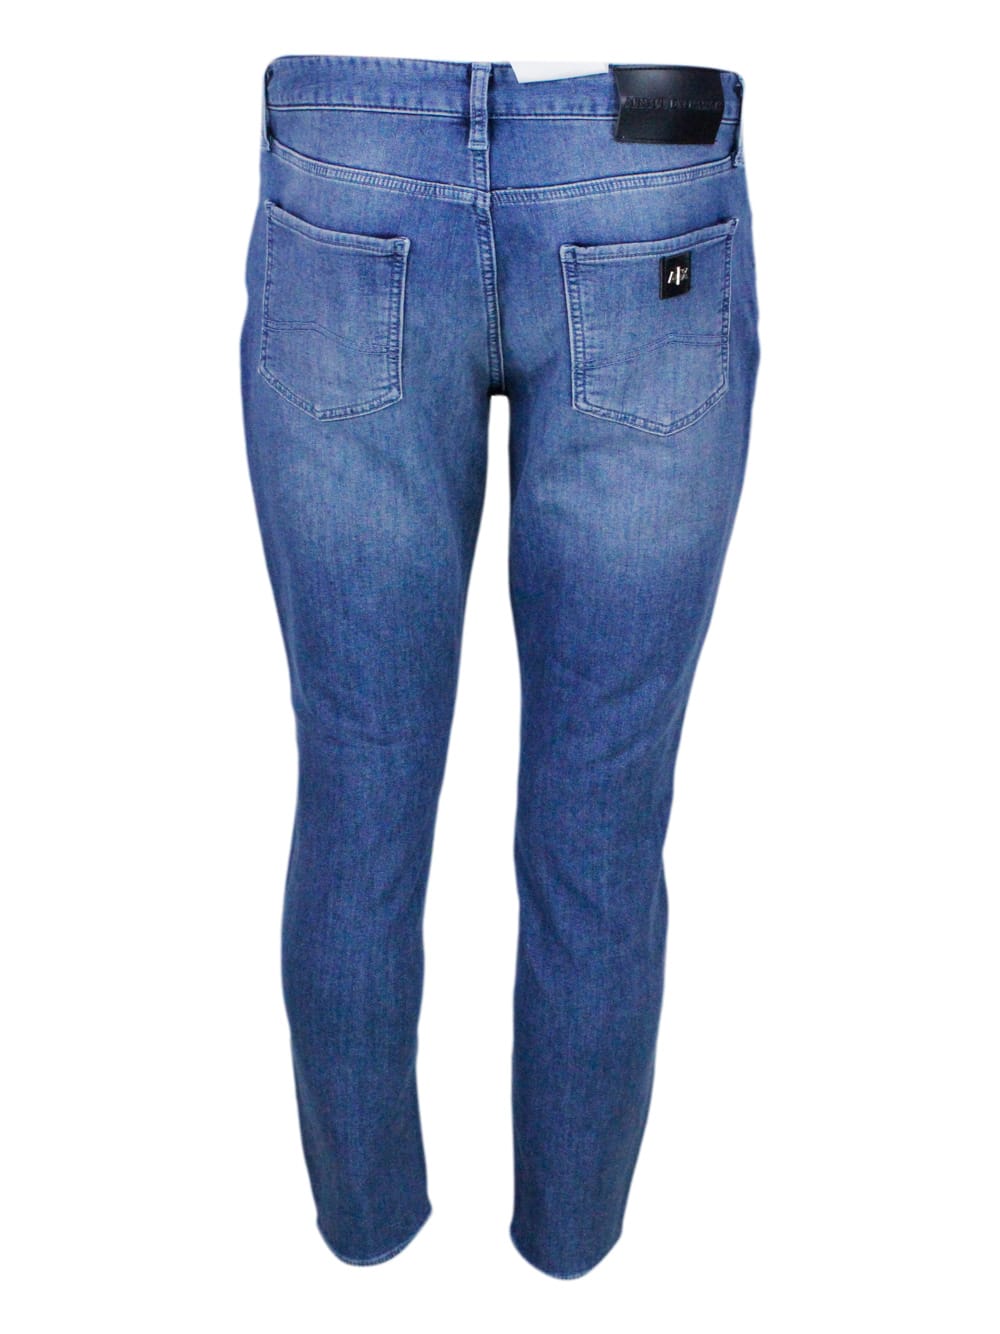 Shop Armani Collezioni Skinny Jeans In Soft Stretch Denim With Matching Stitching And Leather Tab. Zip And Button Closure